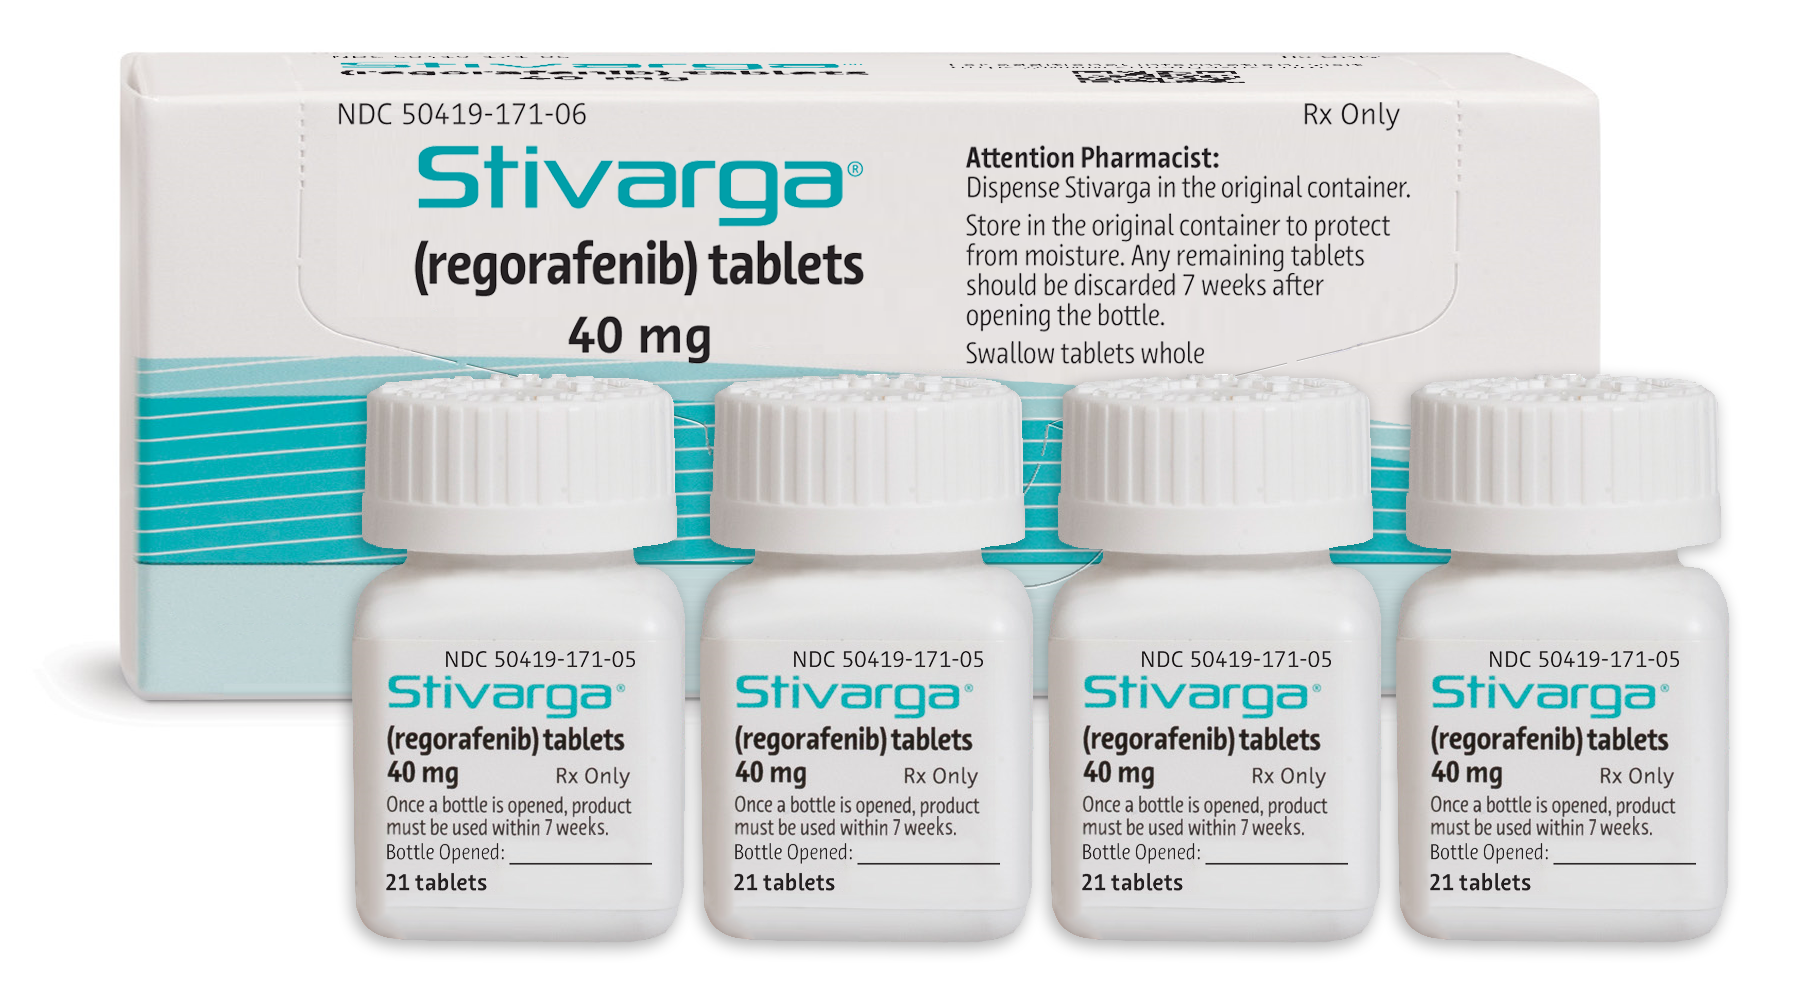 Bayer Introduces Updated Packaging for Stivarga 